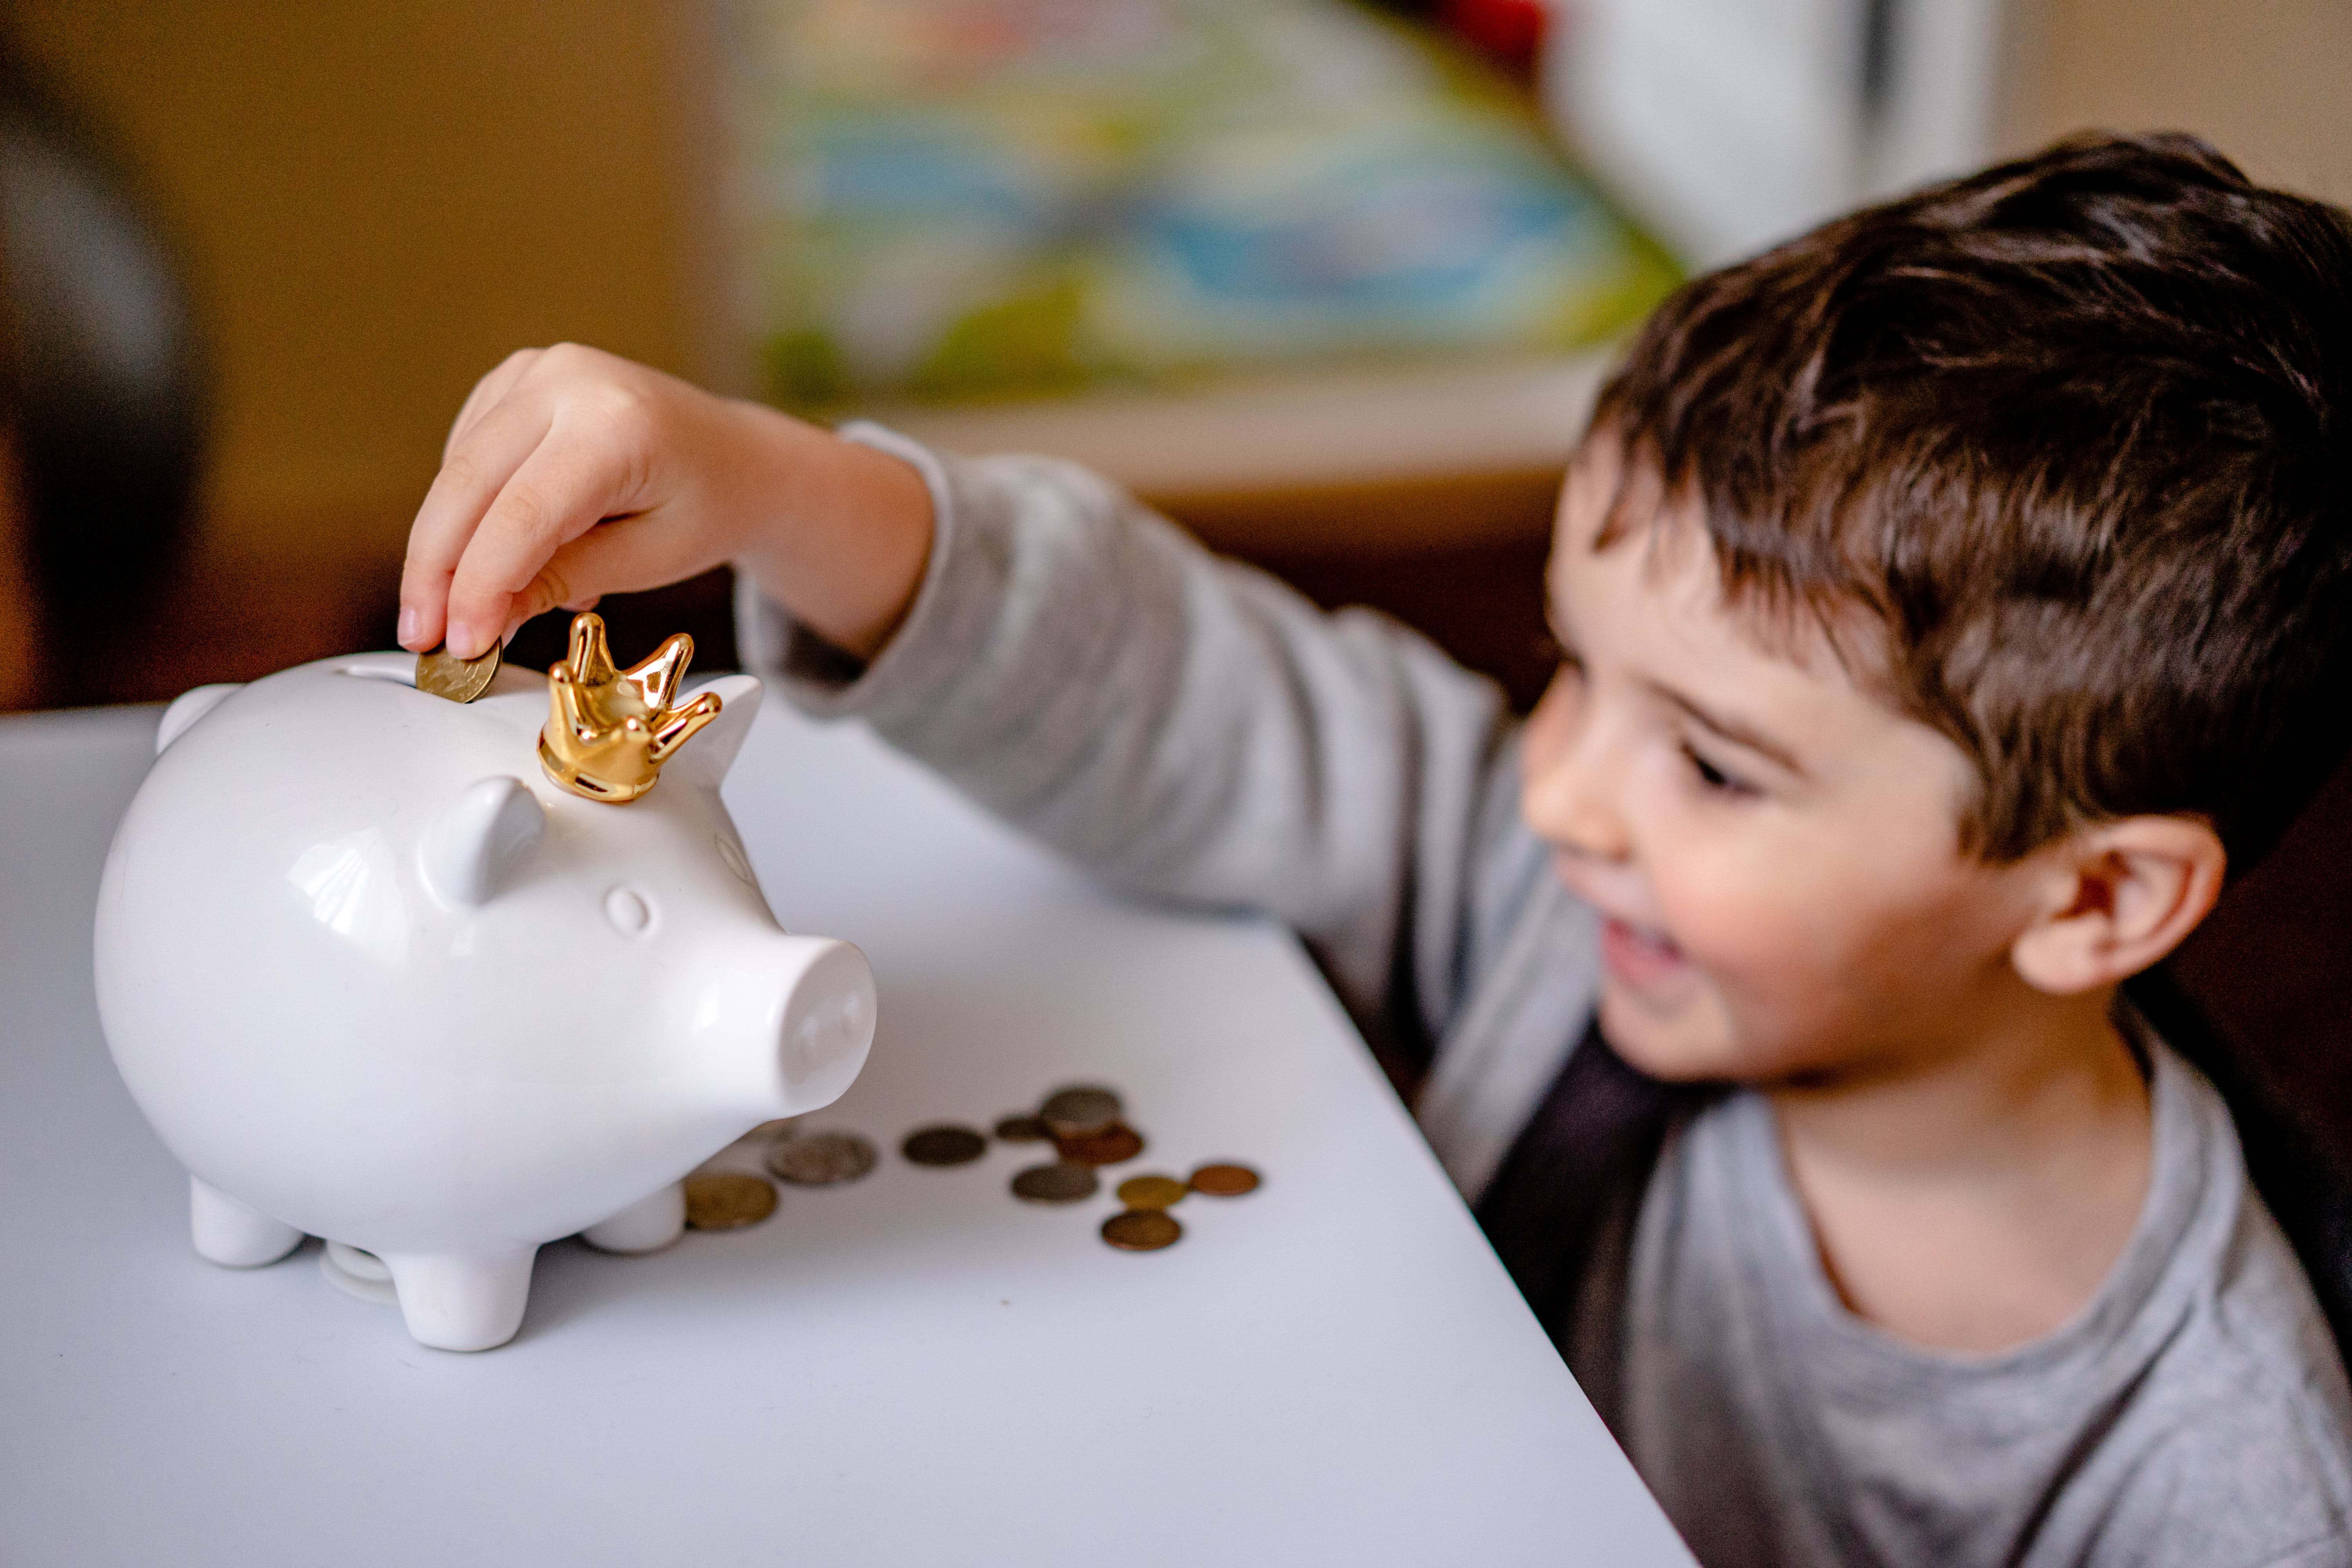 Child putting coins in a piggy bank.